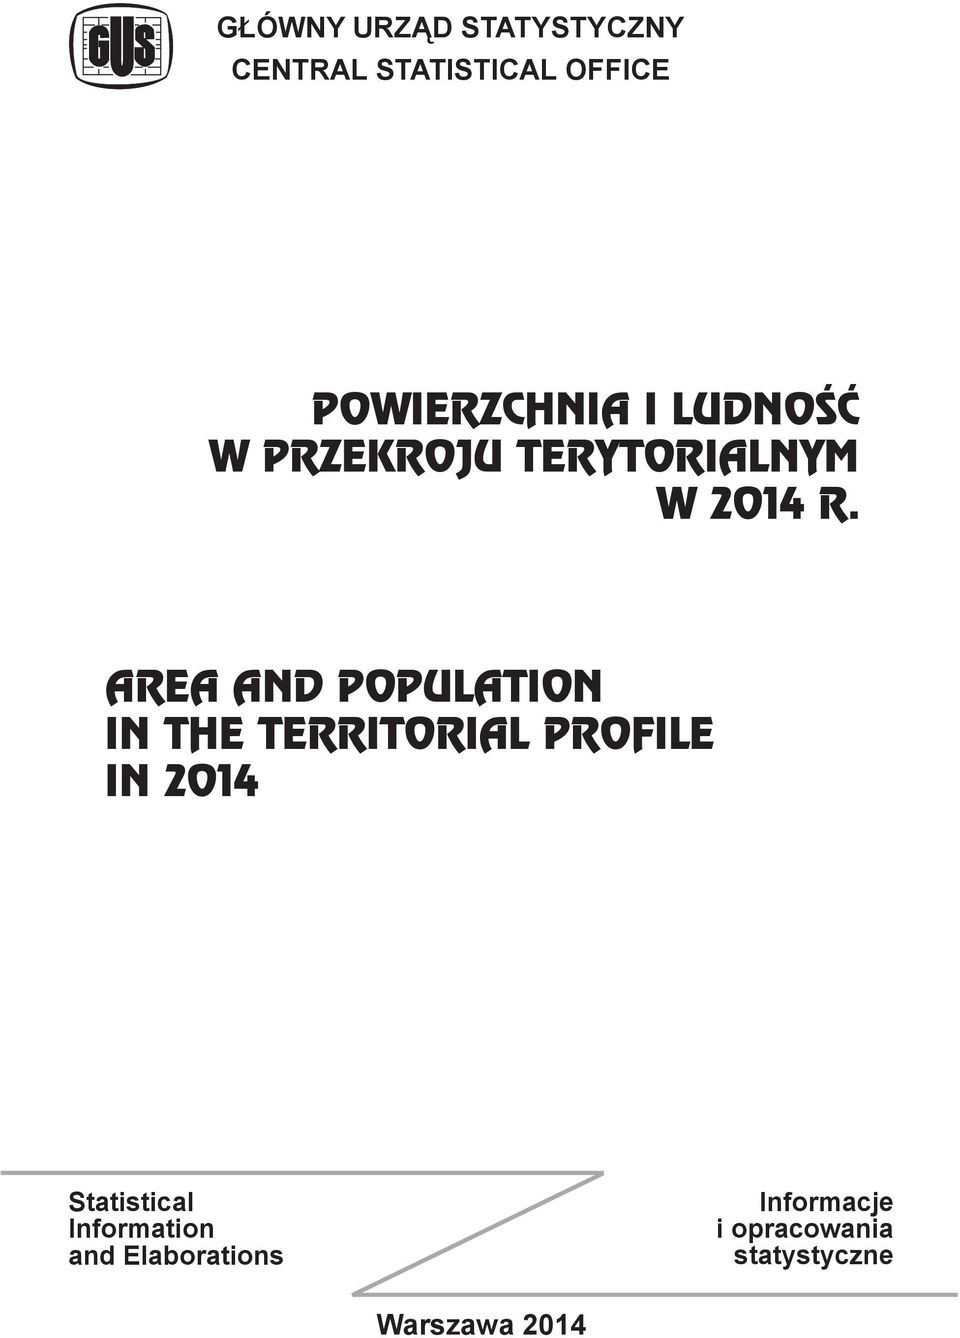 AREA AND POPULATION IN THE TERRITORIAL PROFILE IN 2014